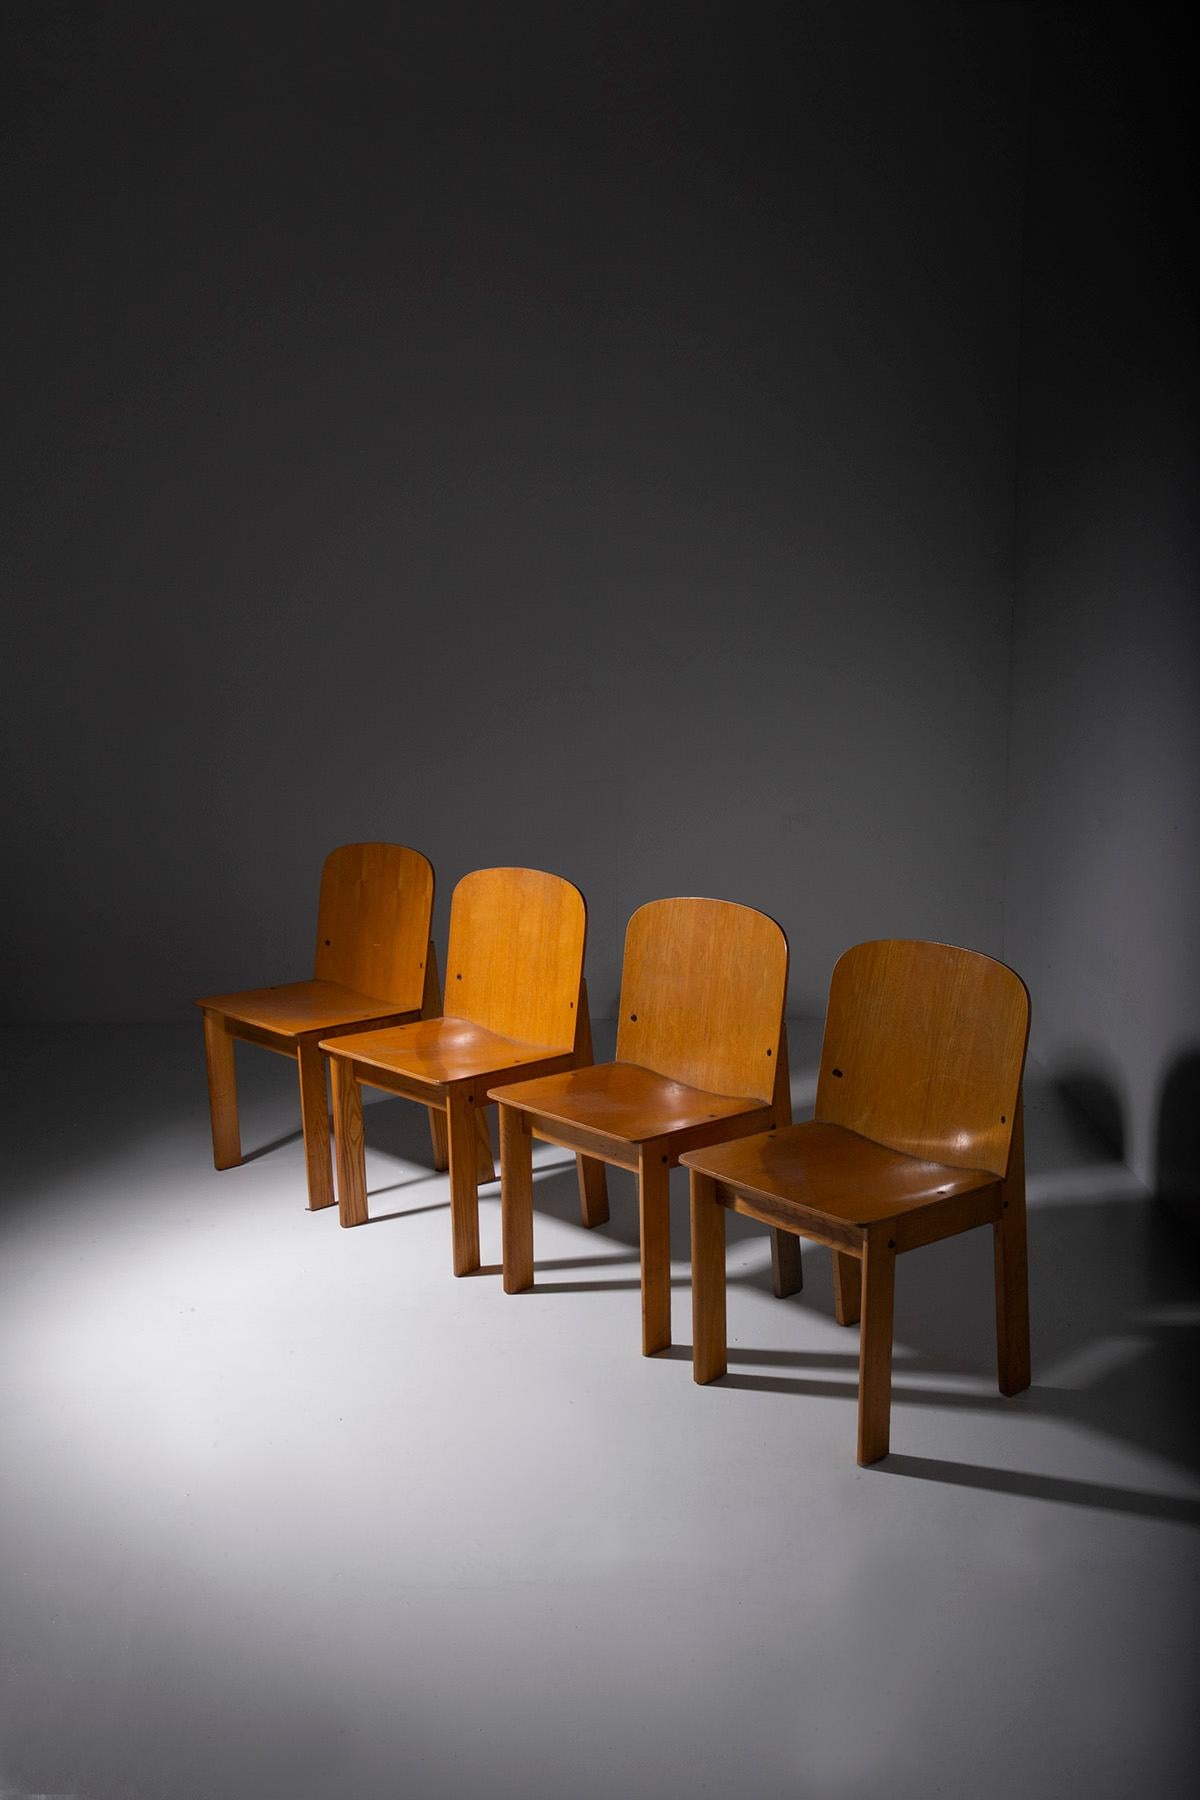 Picture a set of four Italian chairs from the 1960s, crafted from the warm, inviting wood of ash trees. These chairs are a testament to the elegance of simplicity, with their geometric forms and clean, linear lines.

What truly sets these chairs